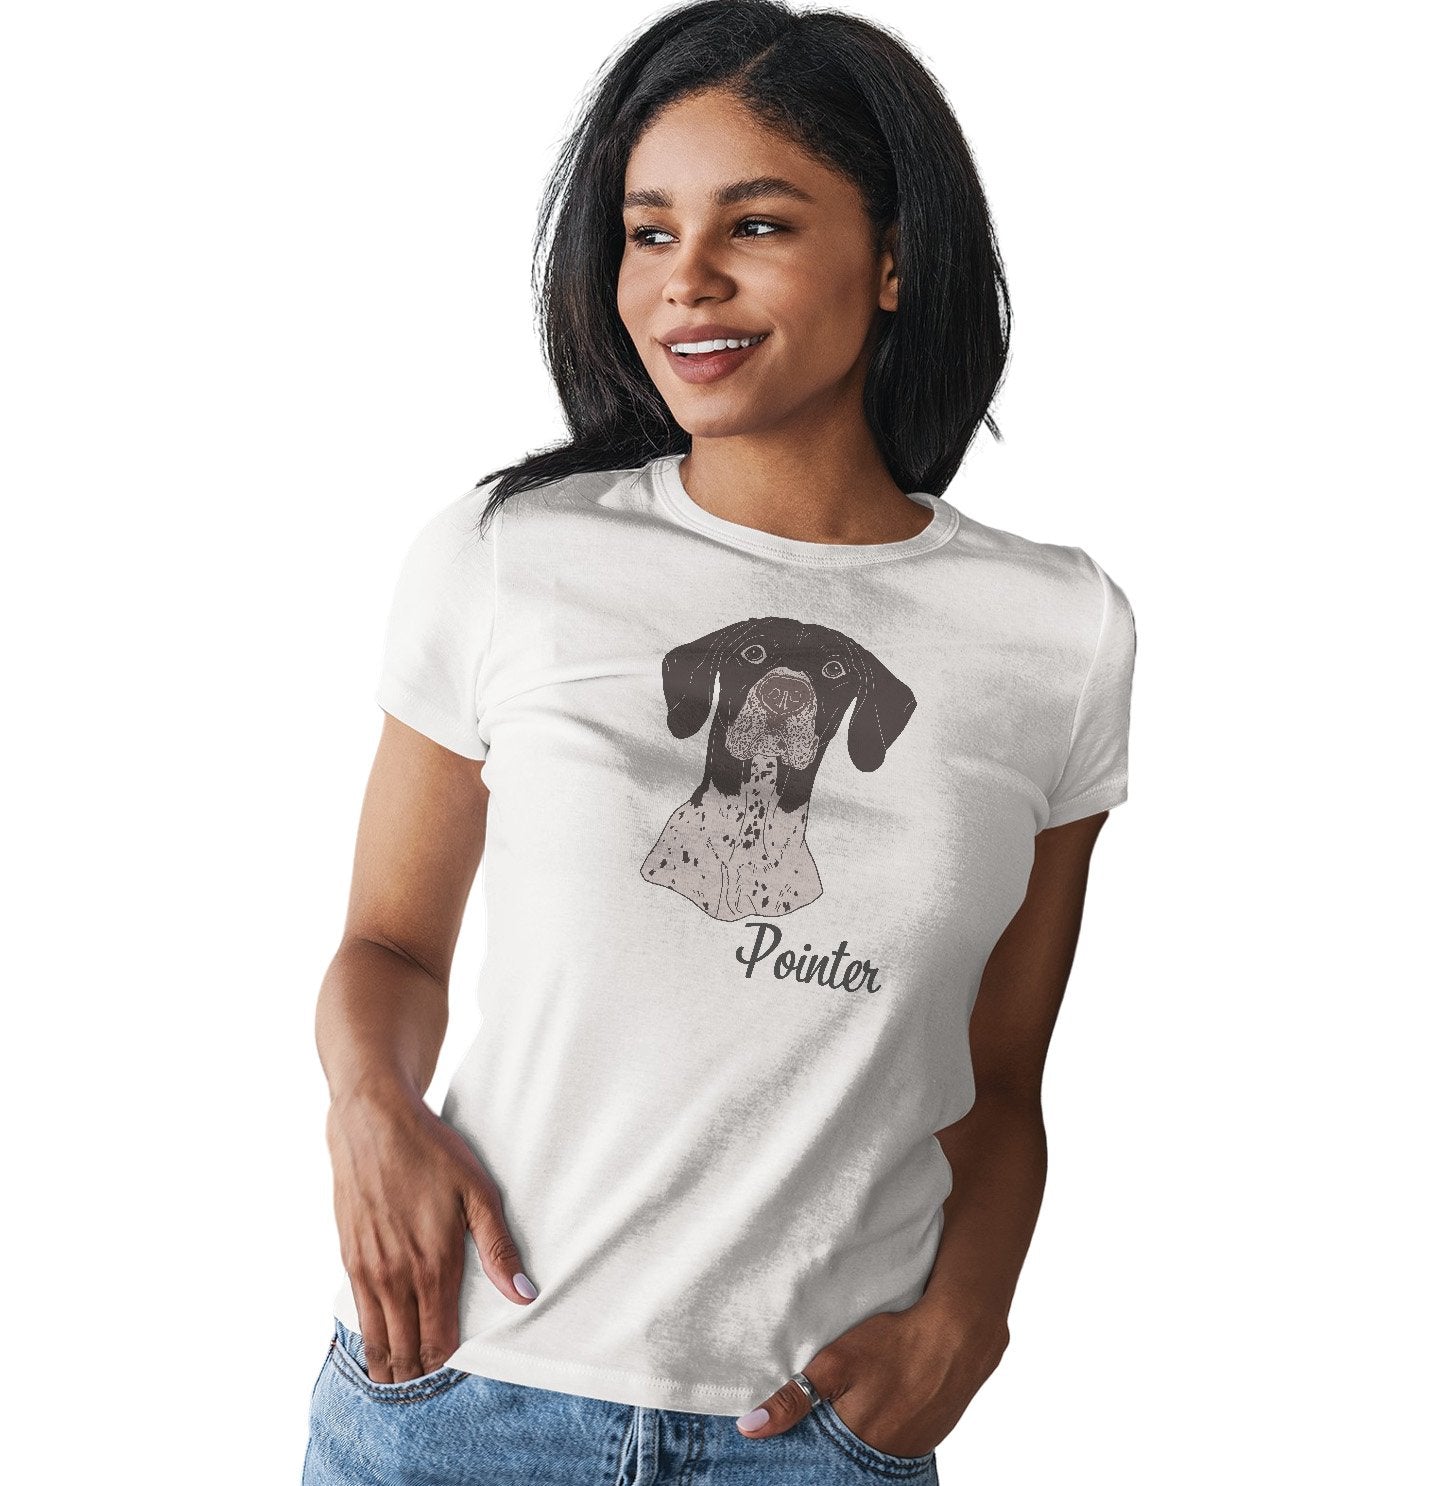 German Shorthaired Pointer Headshot - Women's Fitted T-Shirt